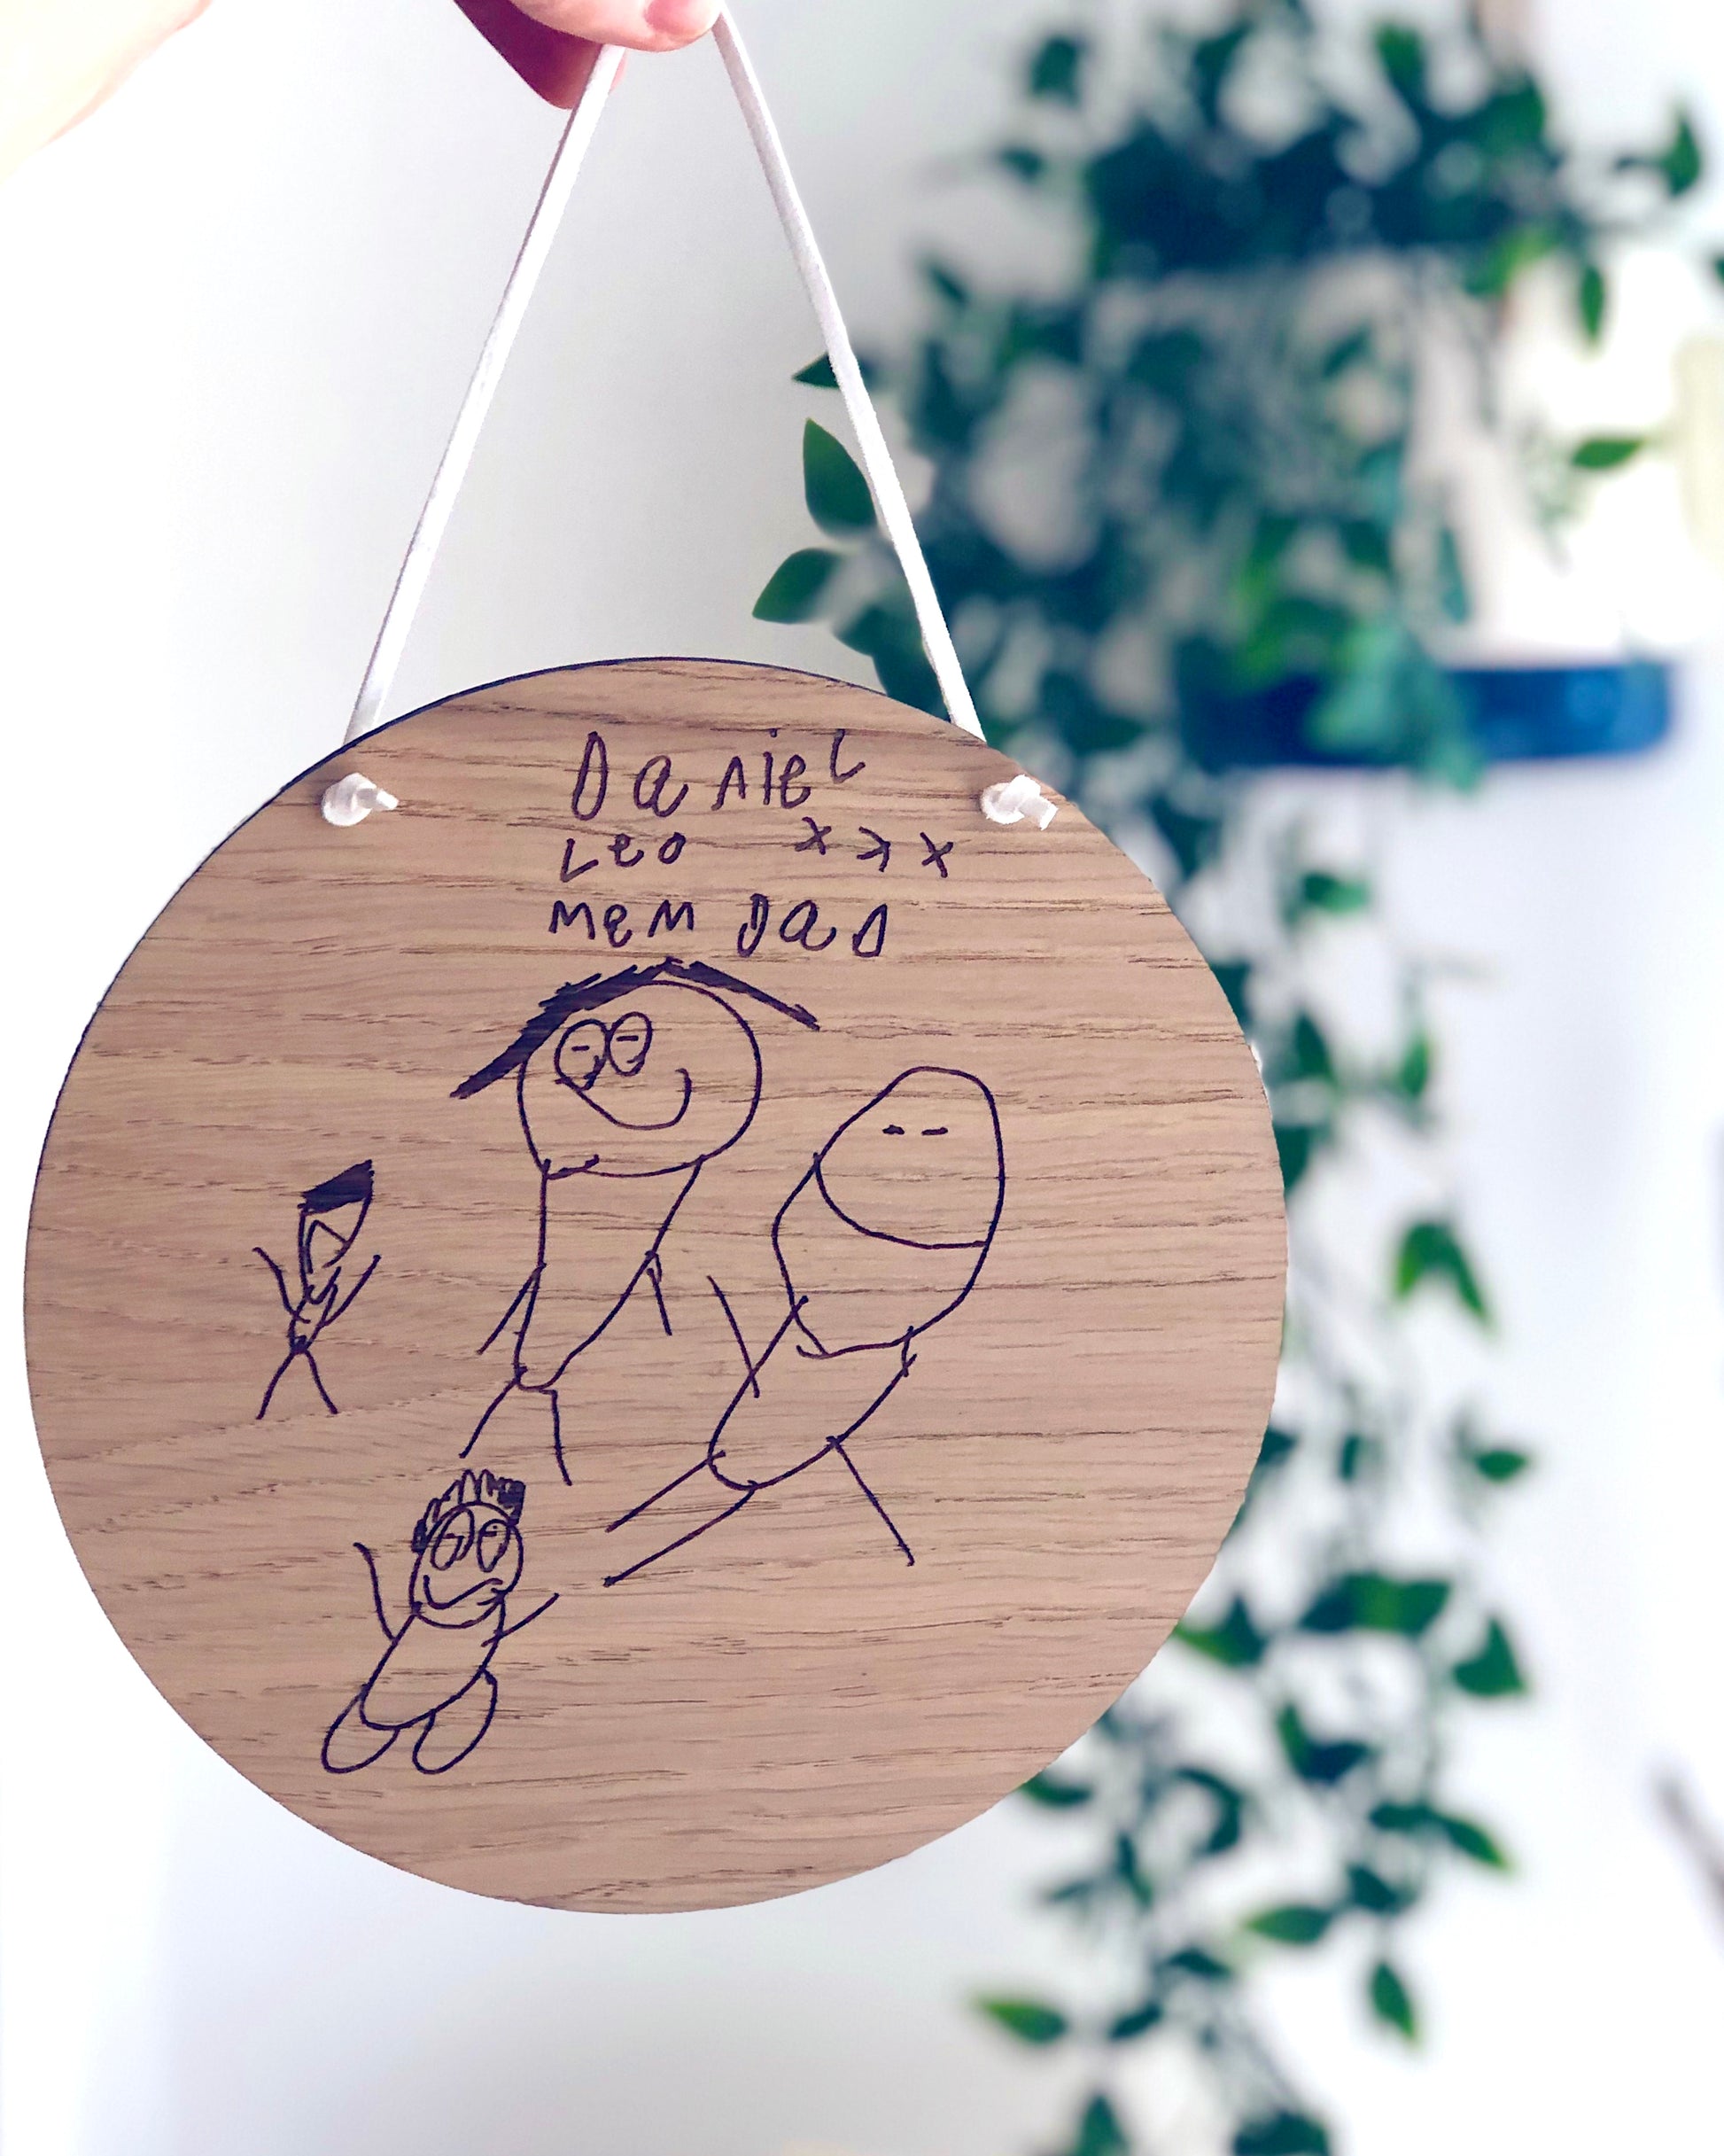 children's drawing engraved into a circular wooden plaque